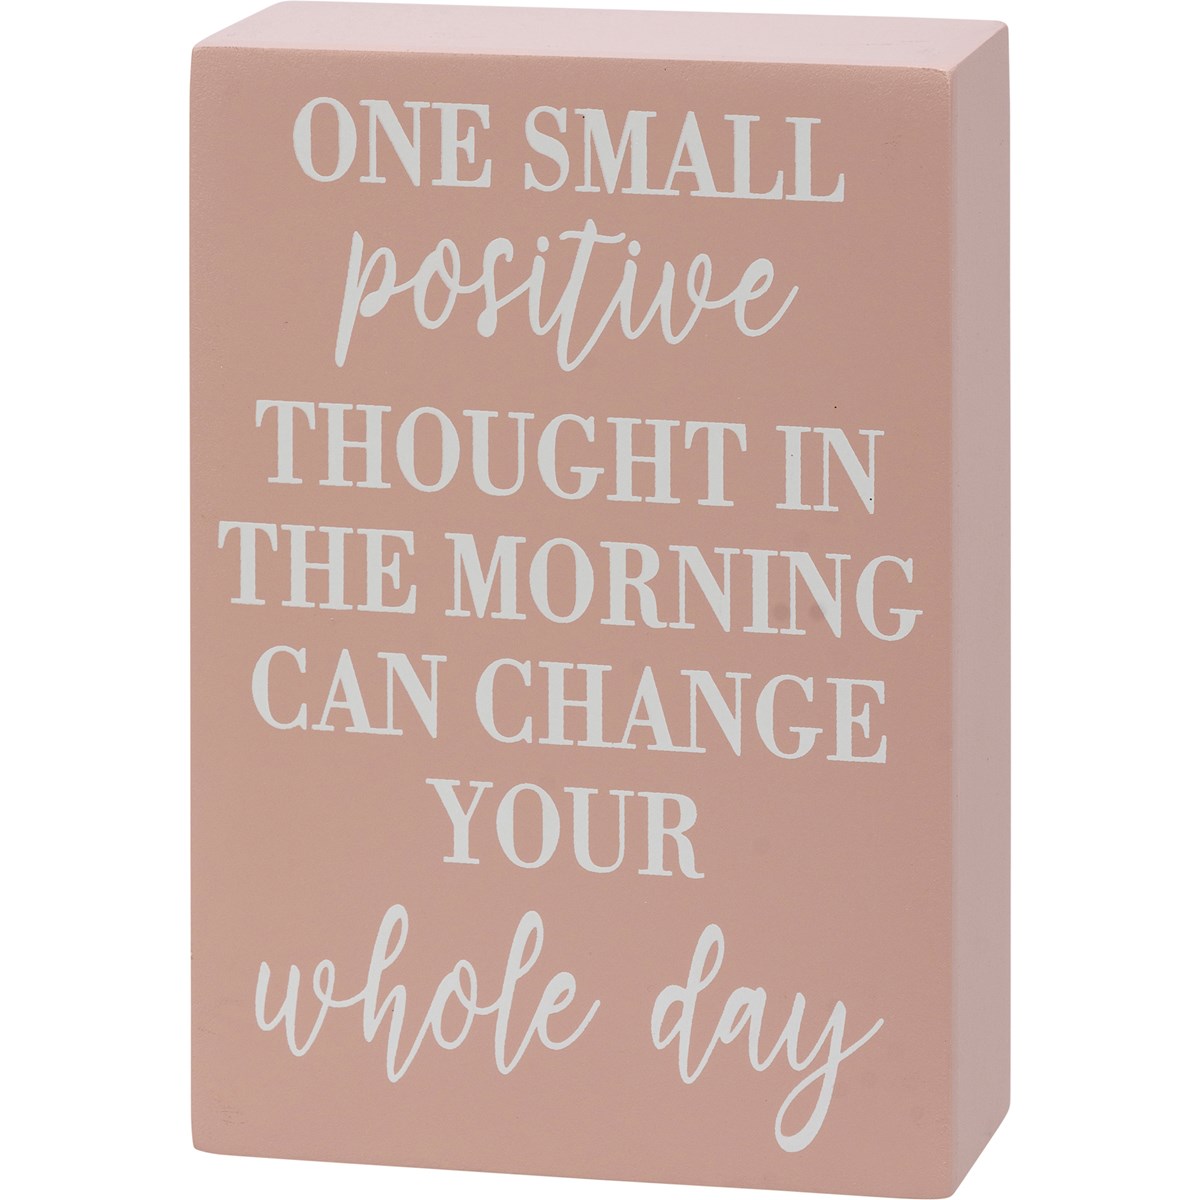 Box Sign - One Small Positive Thought - 4" x 6" x 1.75" - Wood